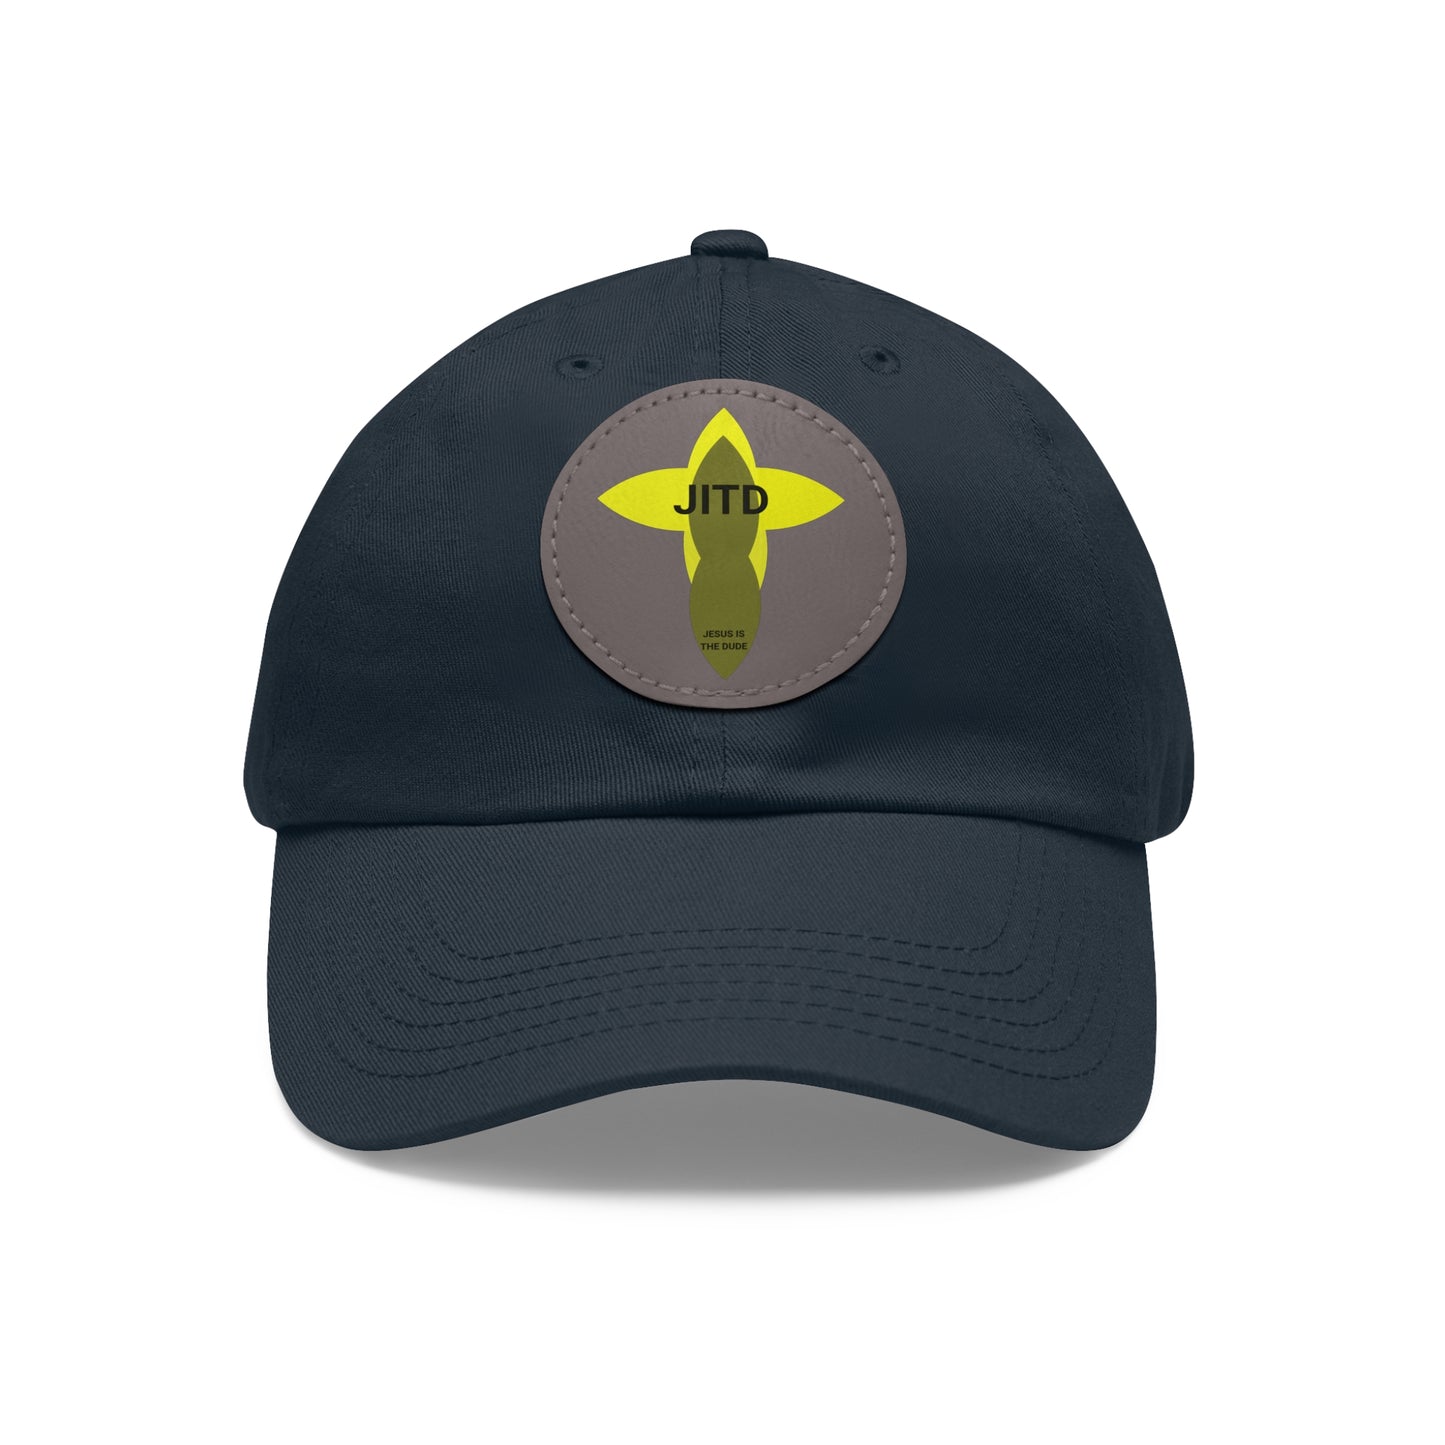 JITD SPEAR CROSS HAT WITH LEATHER PATCH